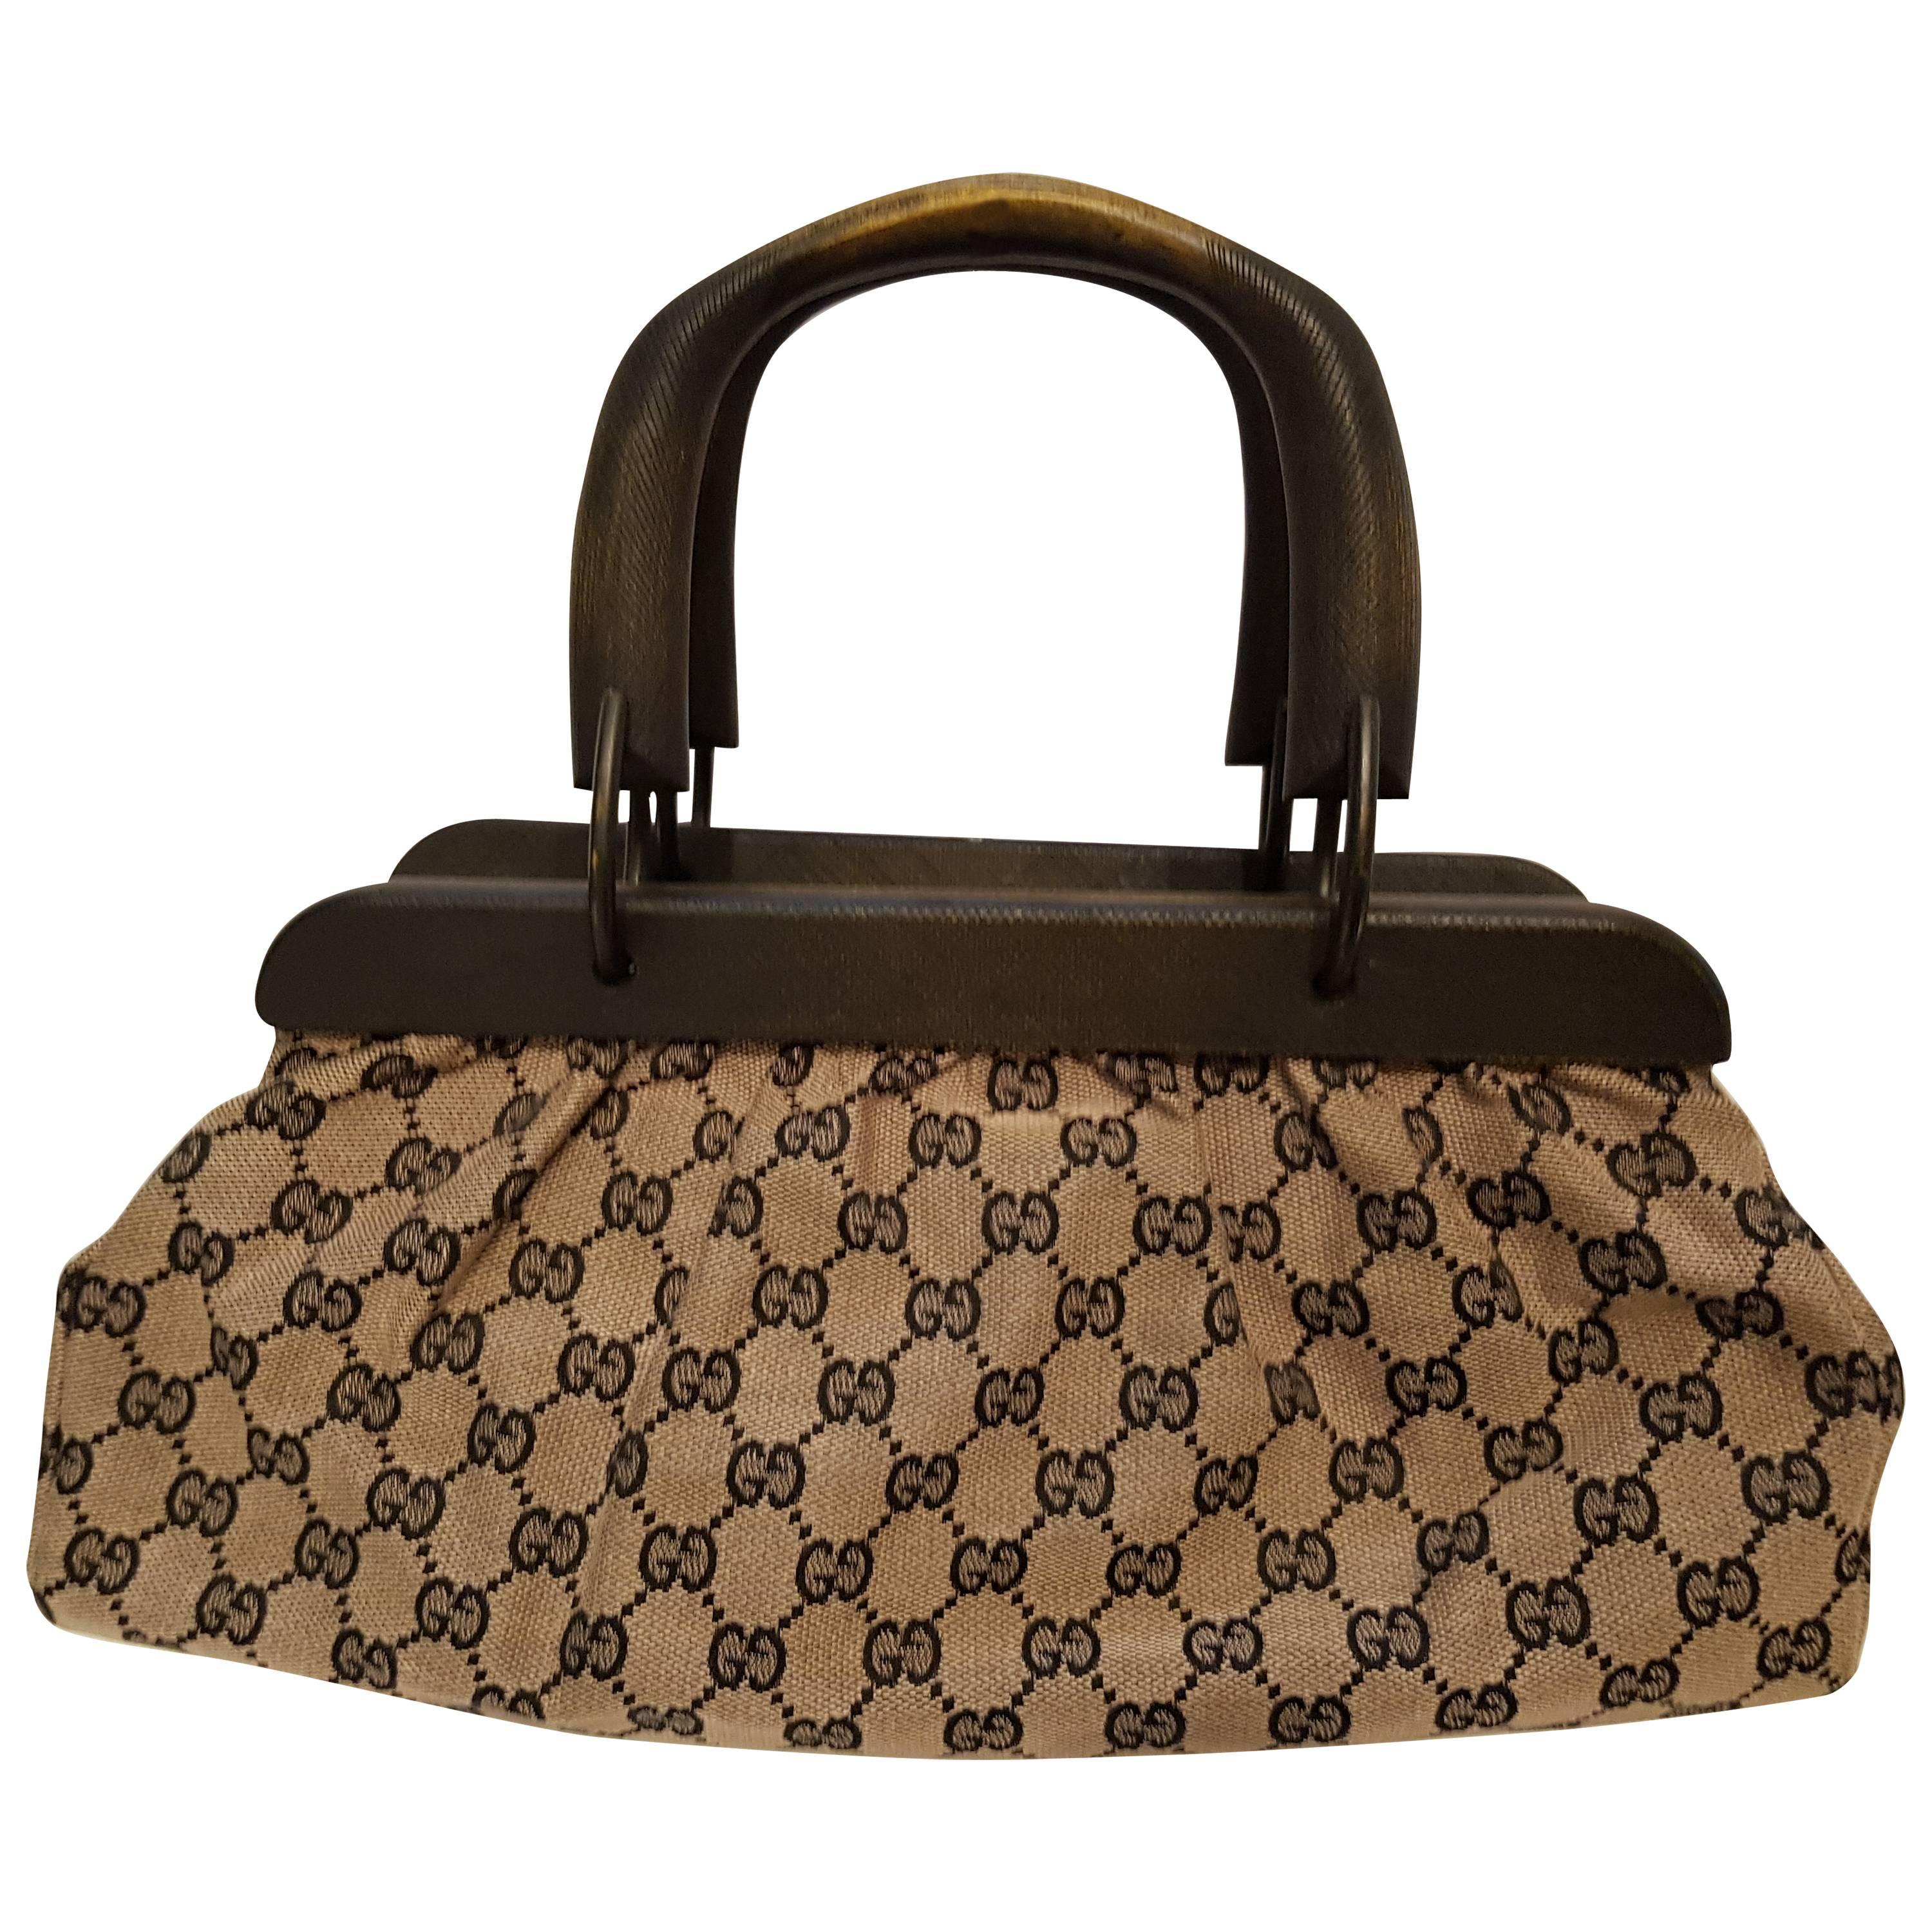 Gucci Doctor's bag by Tom Ford